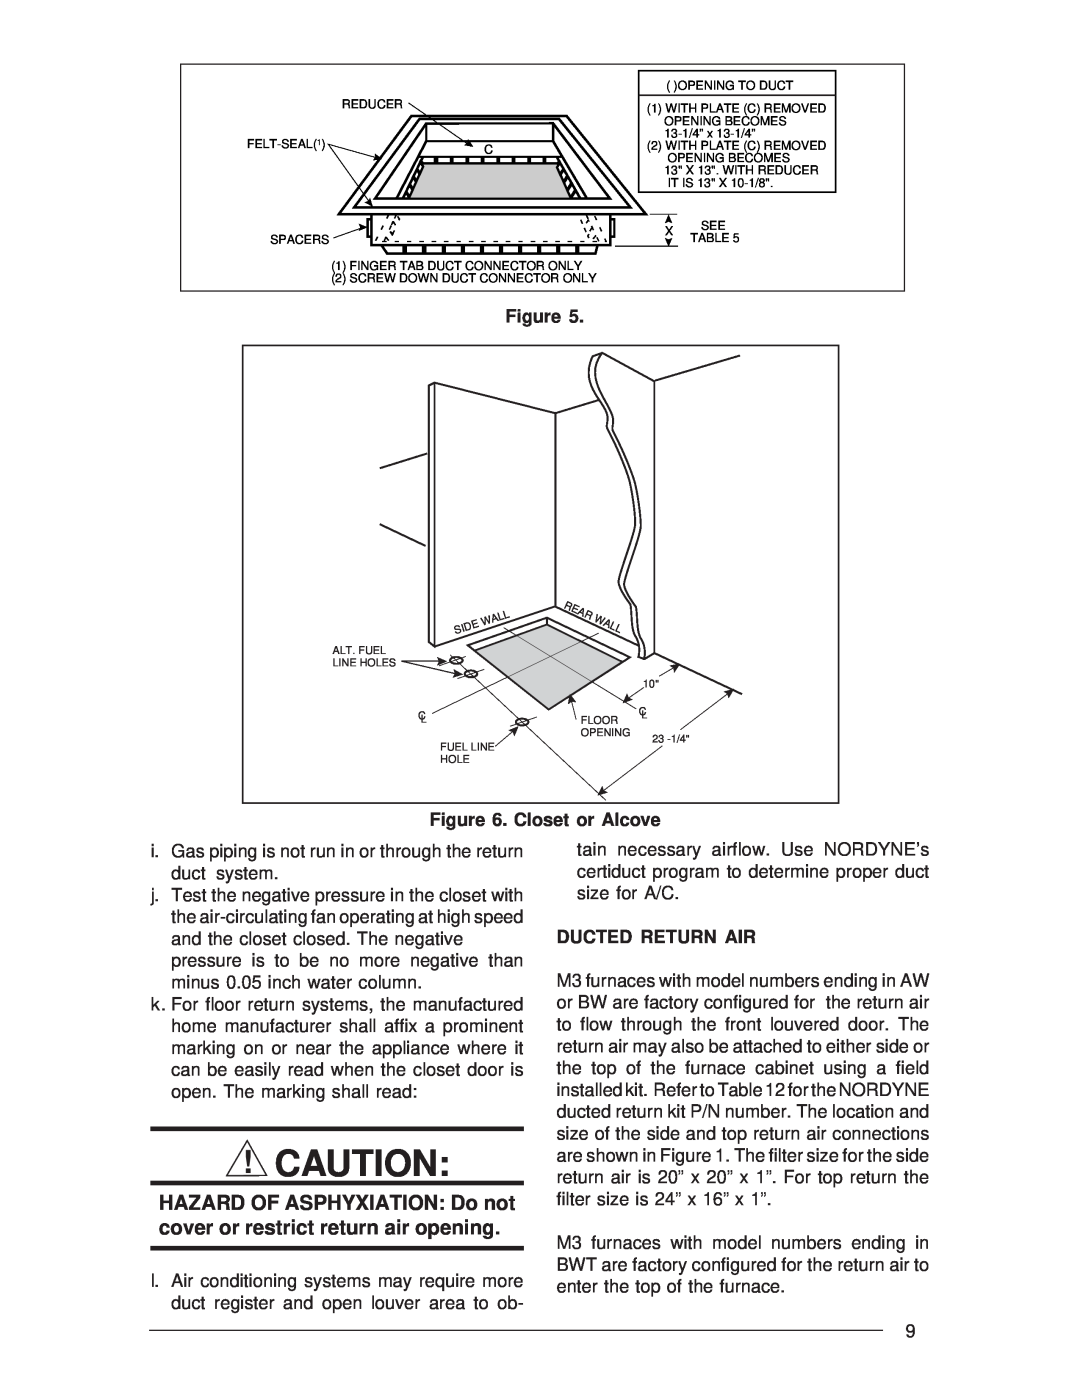 Nordyne M3RL installation instructions Closet or Alcove, Ducted Return Air 